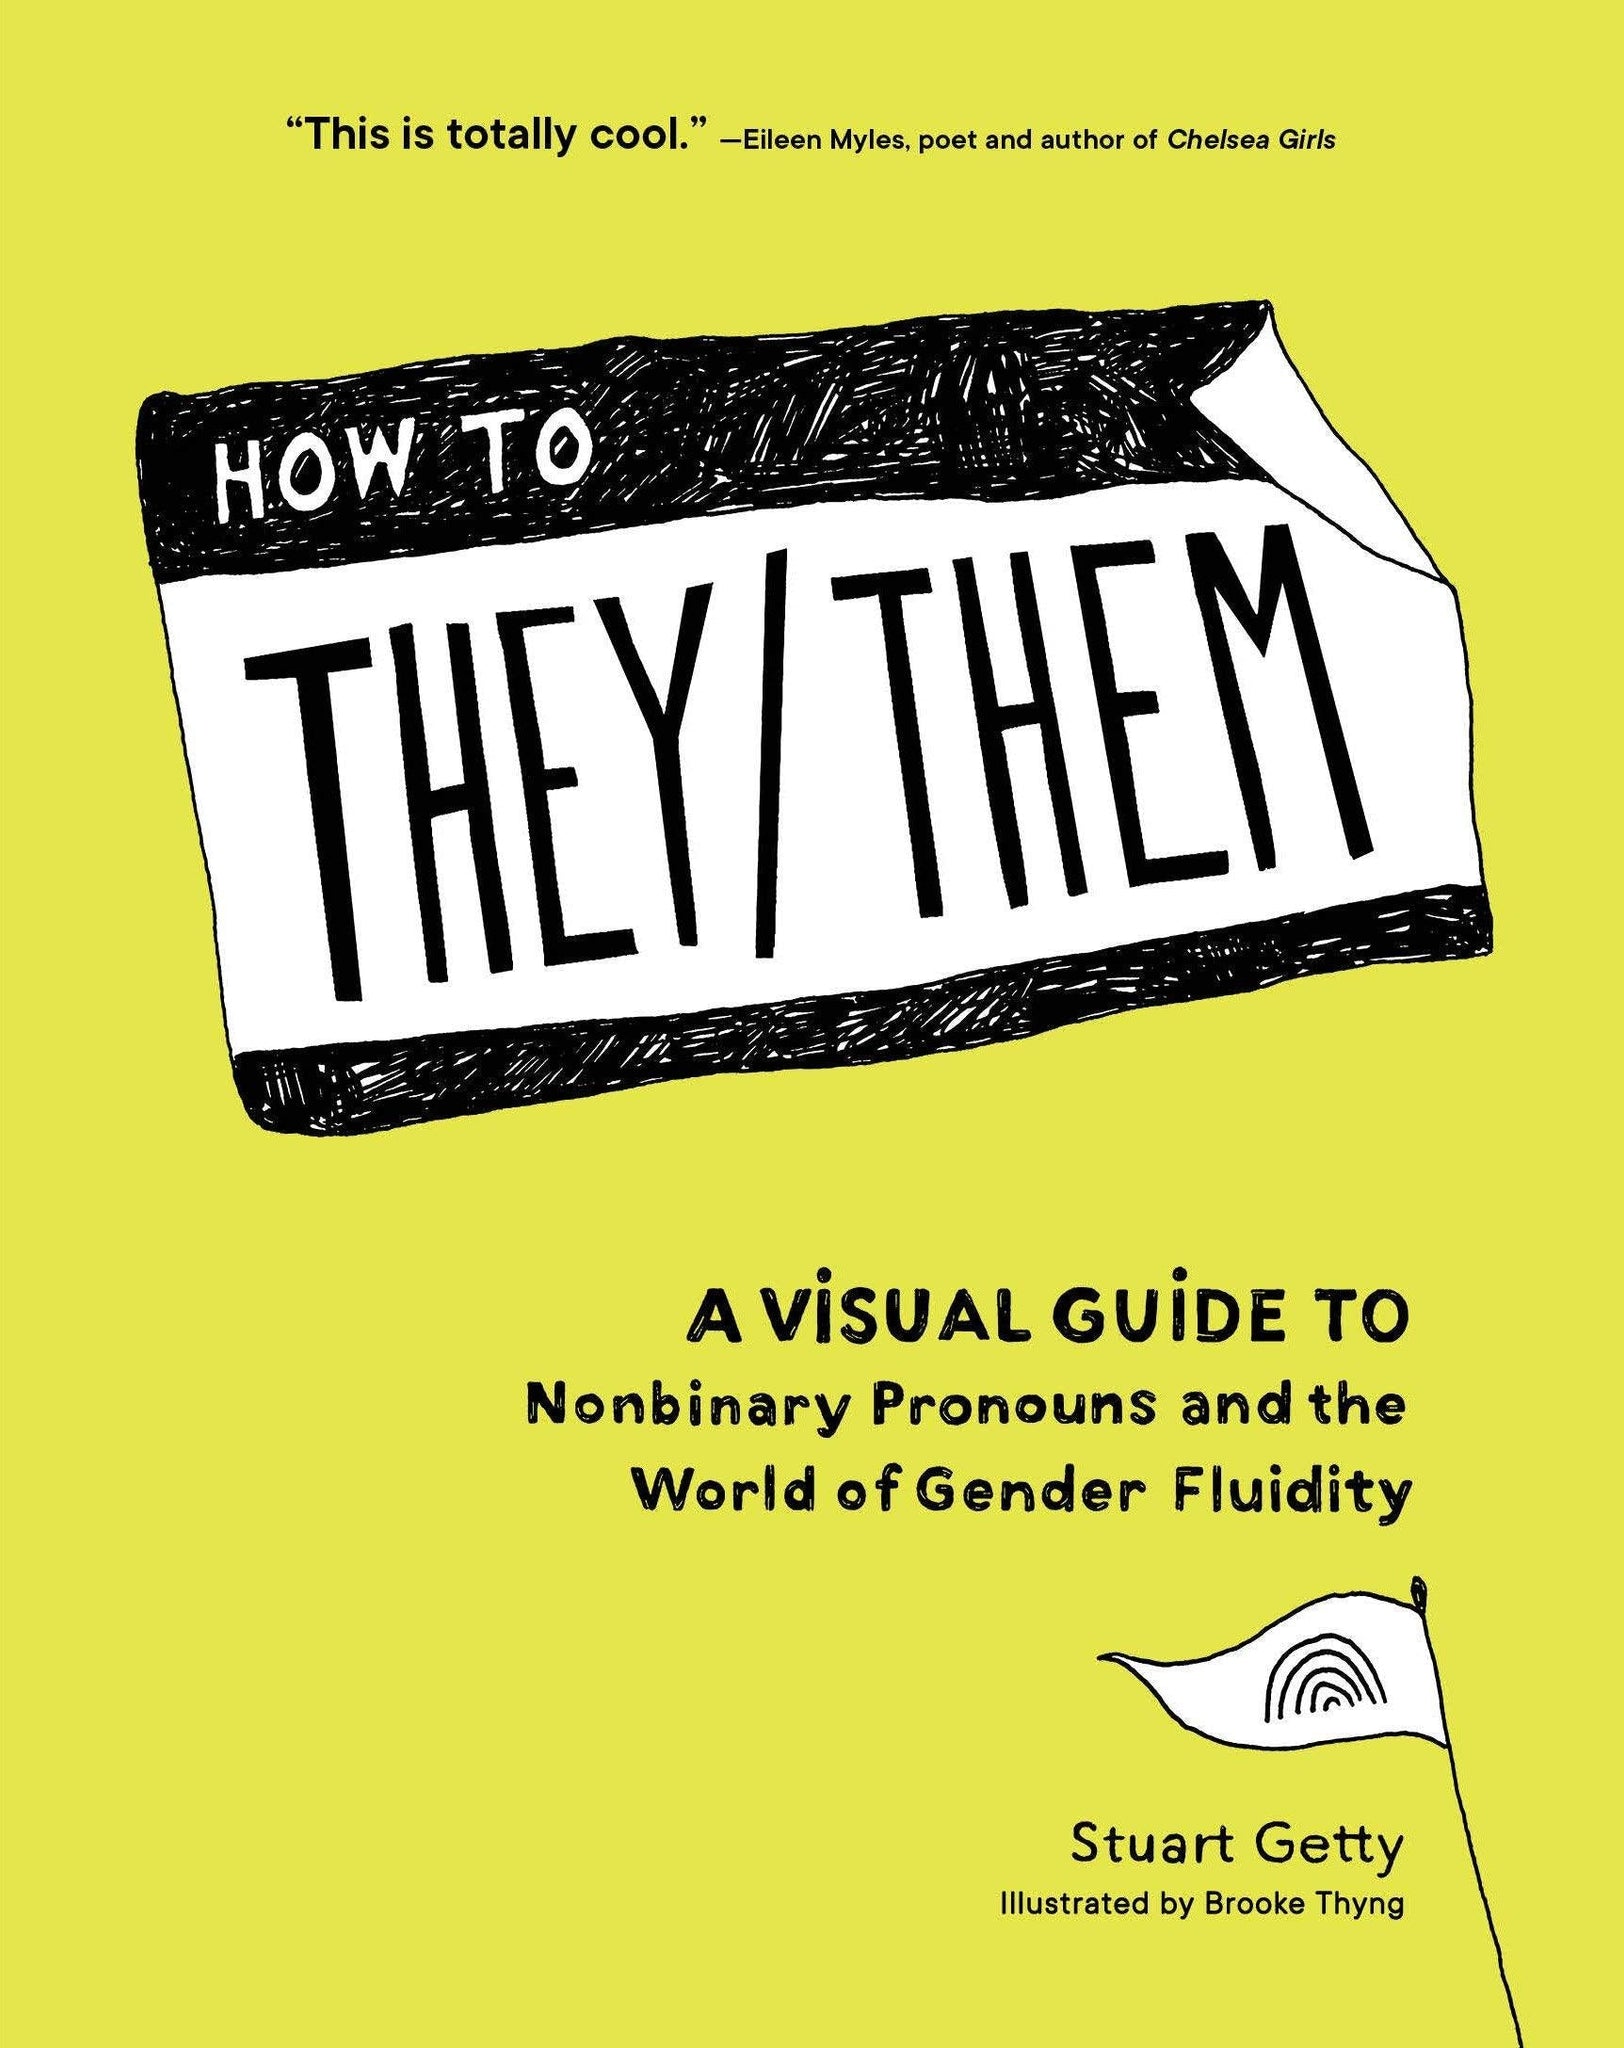 How to They/Them: A Visual Guide to Nonbinary Pronouns and the World of Gender Fluidity - ShopQueer.co